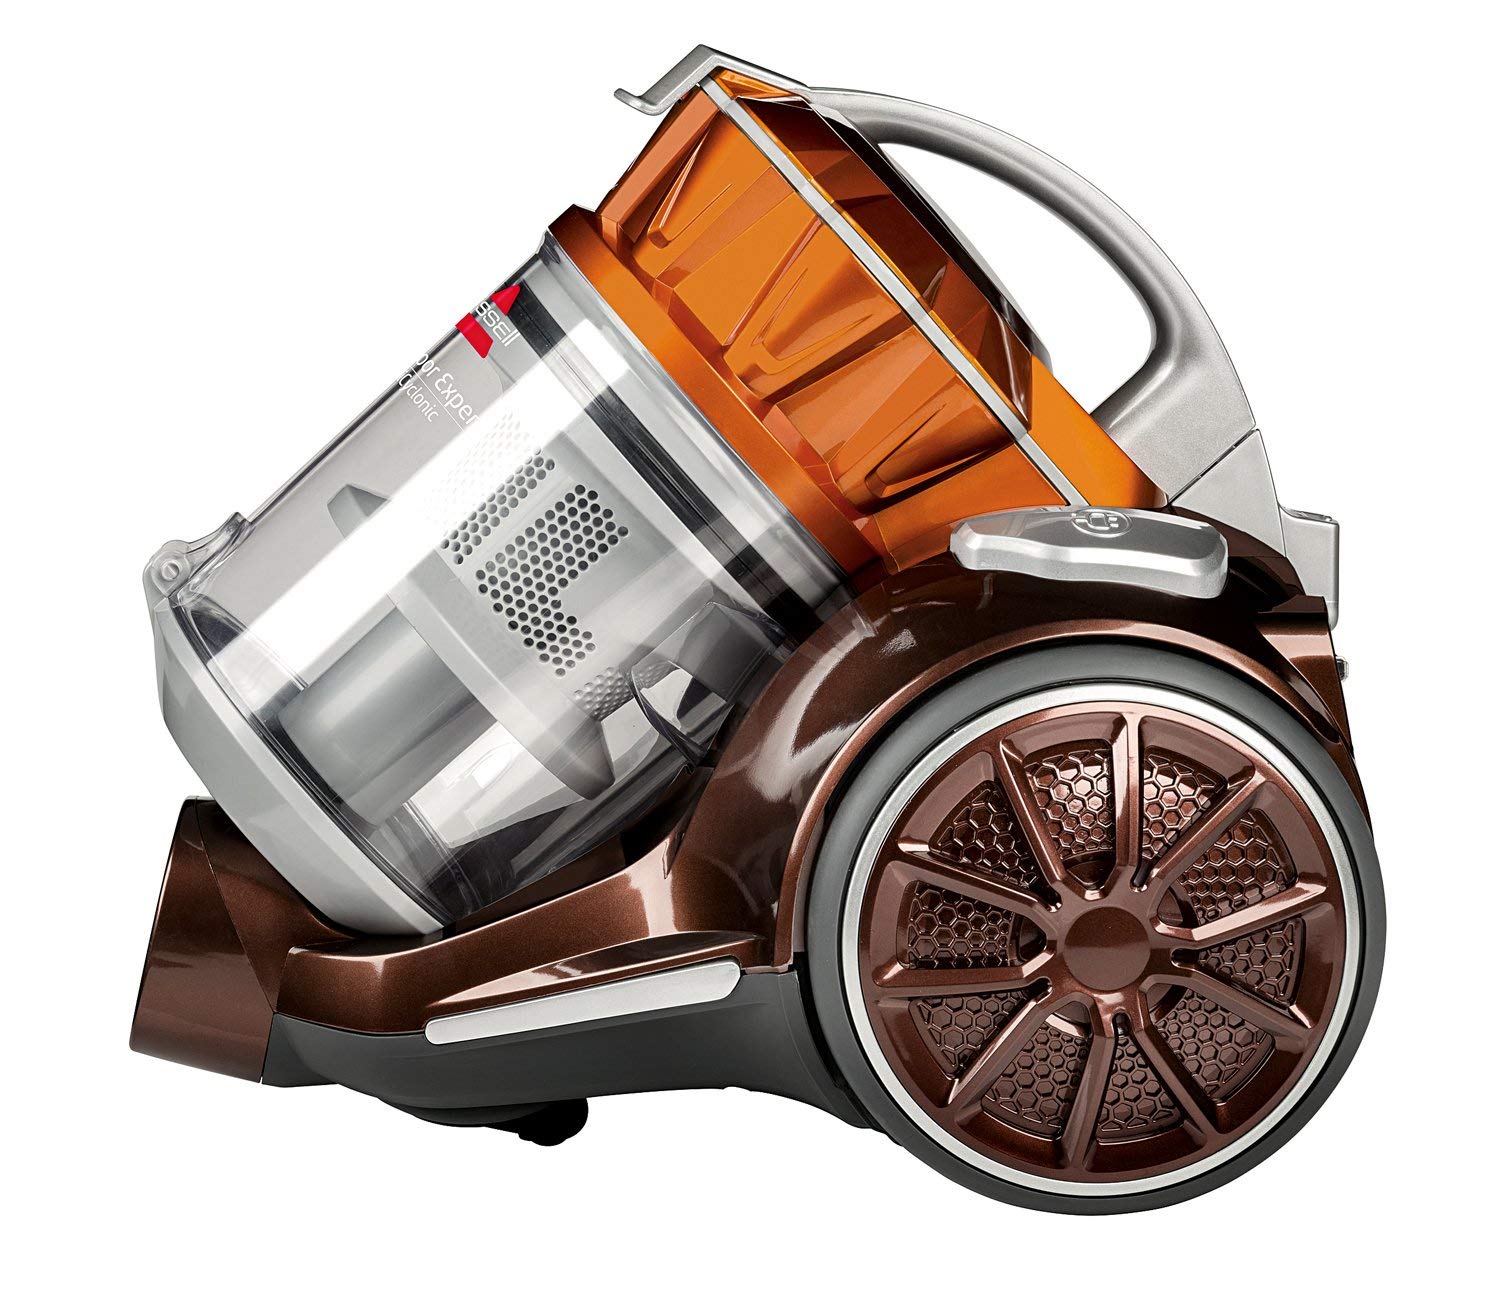 Bissell-Hard-Floor-Expert-Multi-Cyclonic-Canister-Vacuum-Cleaner